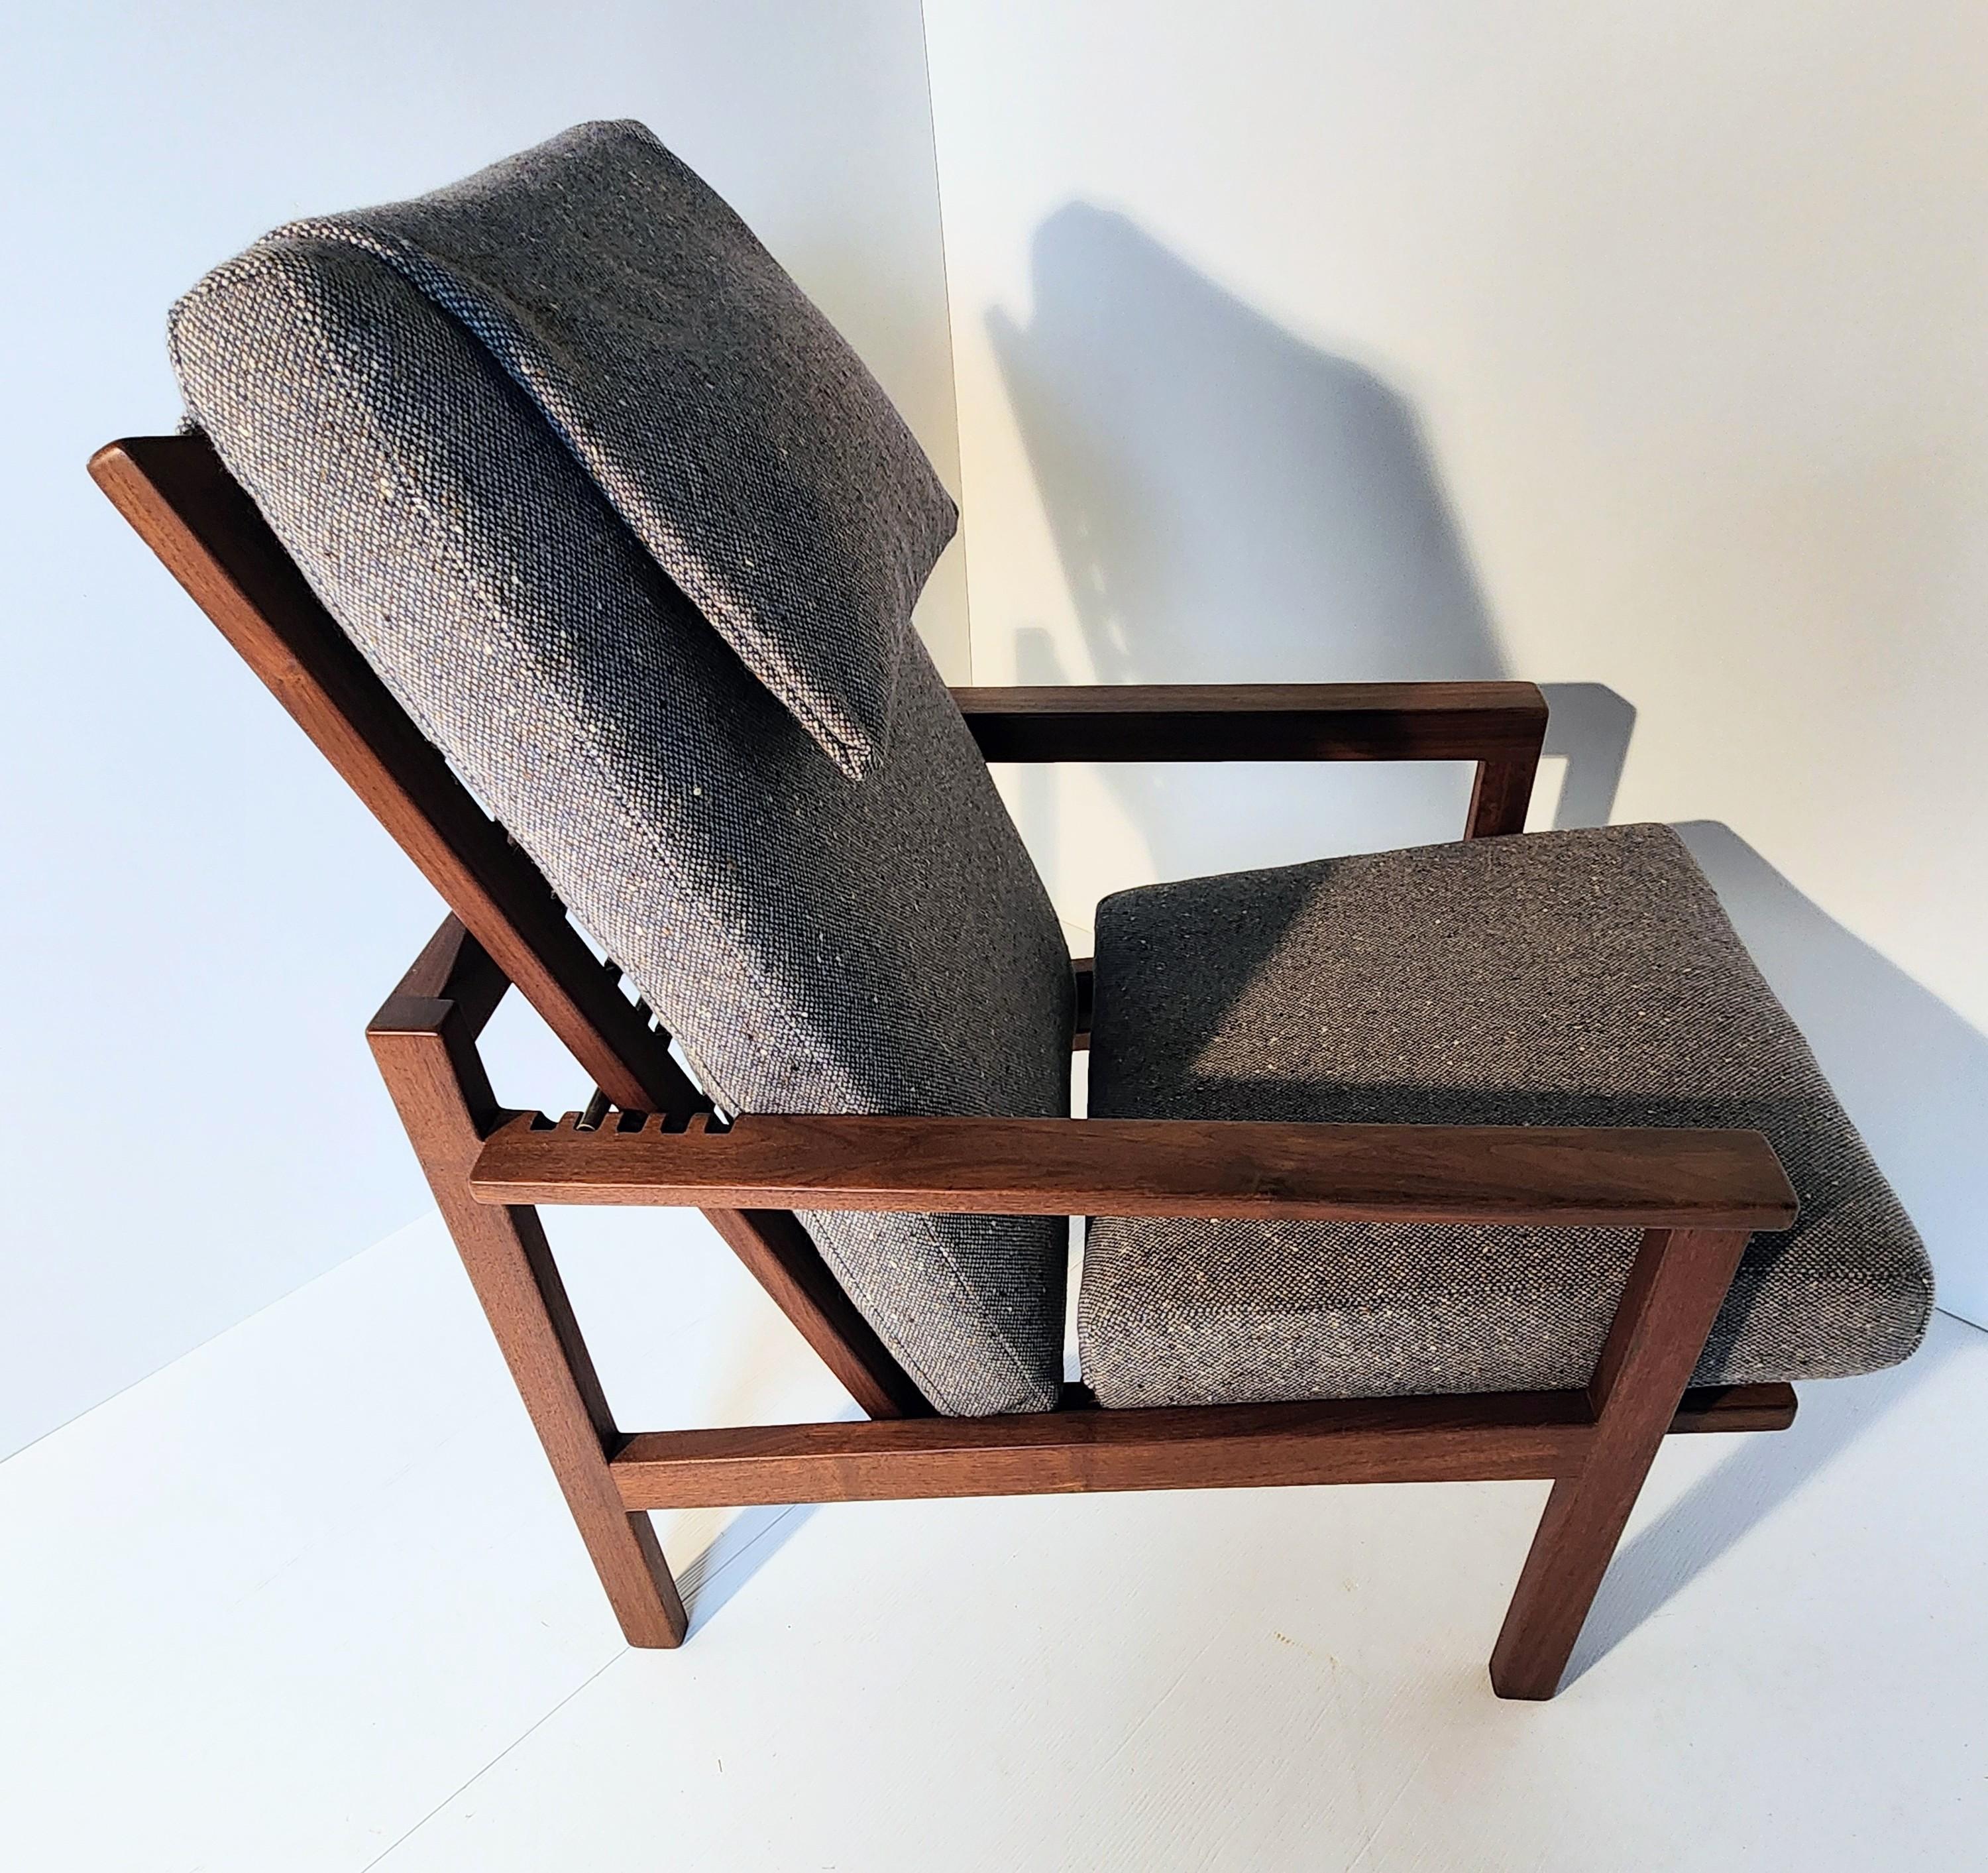 An adjustable lounge chair from one of Ohio's leading furniture craftsman, Arden Riddle. A hand crafted frame of black walnut with cased spring supports makes this a very unusual and comfortable chair. Unlike George Nakashima's use of spindles in